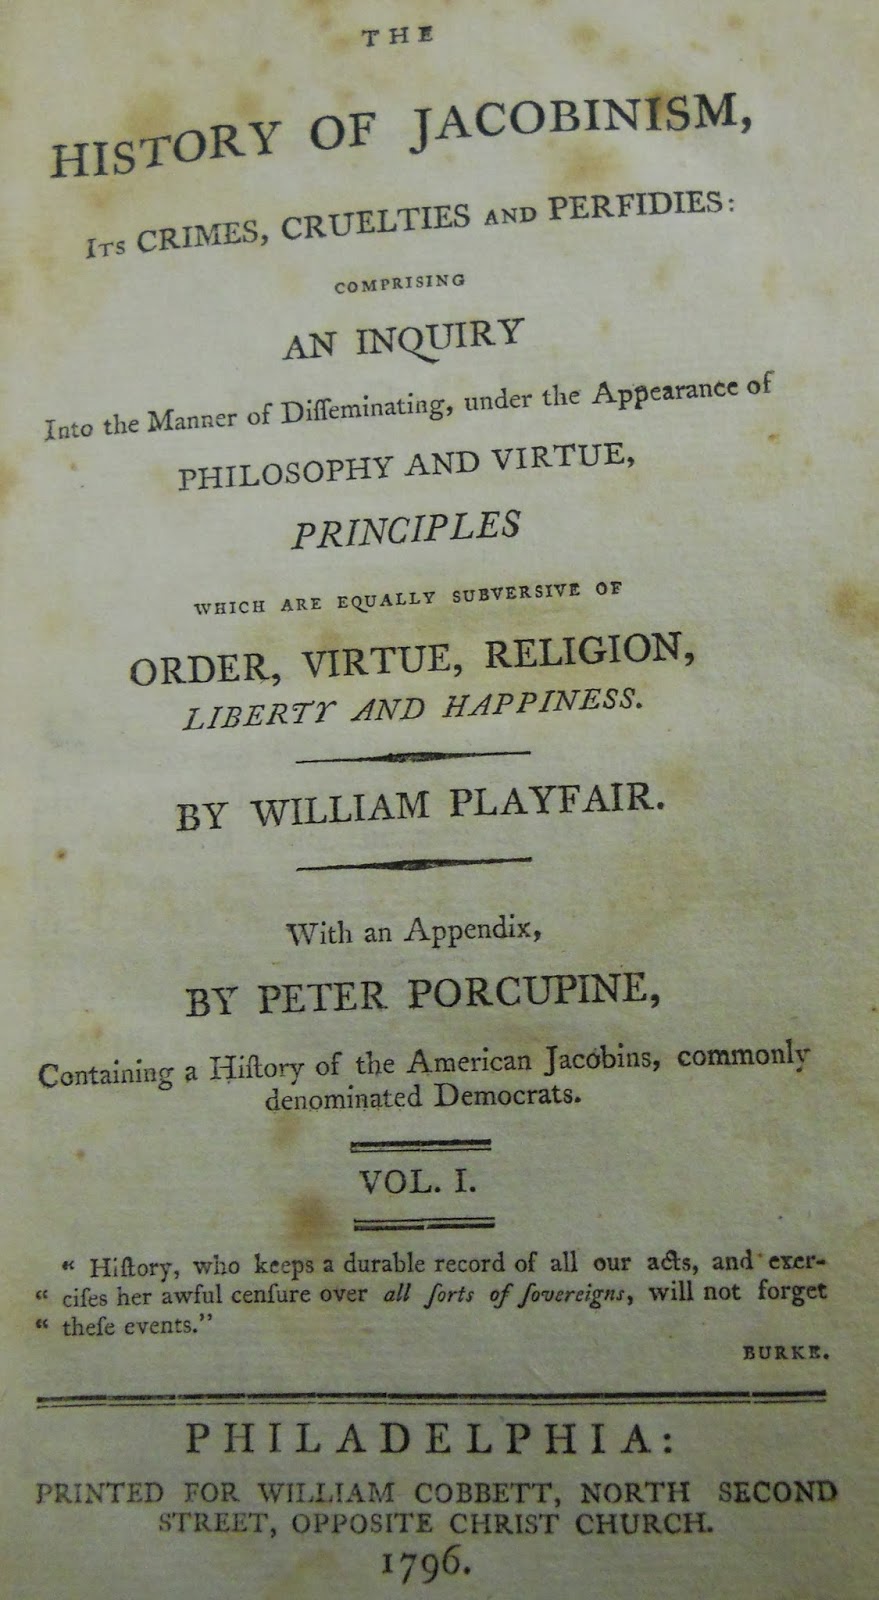 The History of Jacobinsim, Its Crimes, Cruelties and Perfidies (1796)